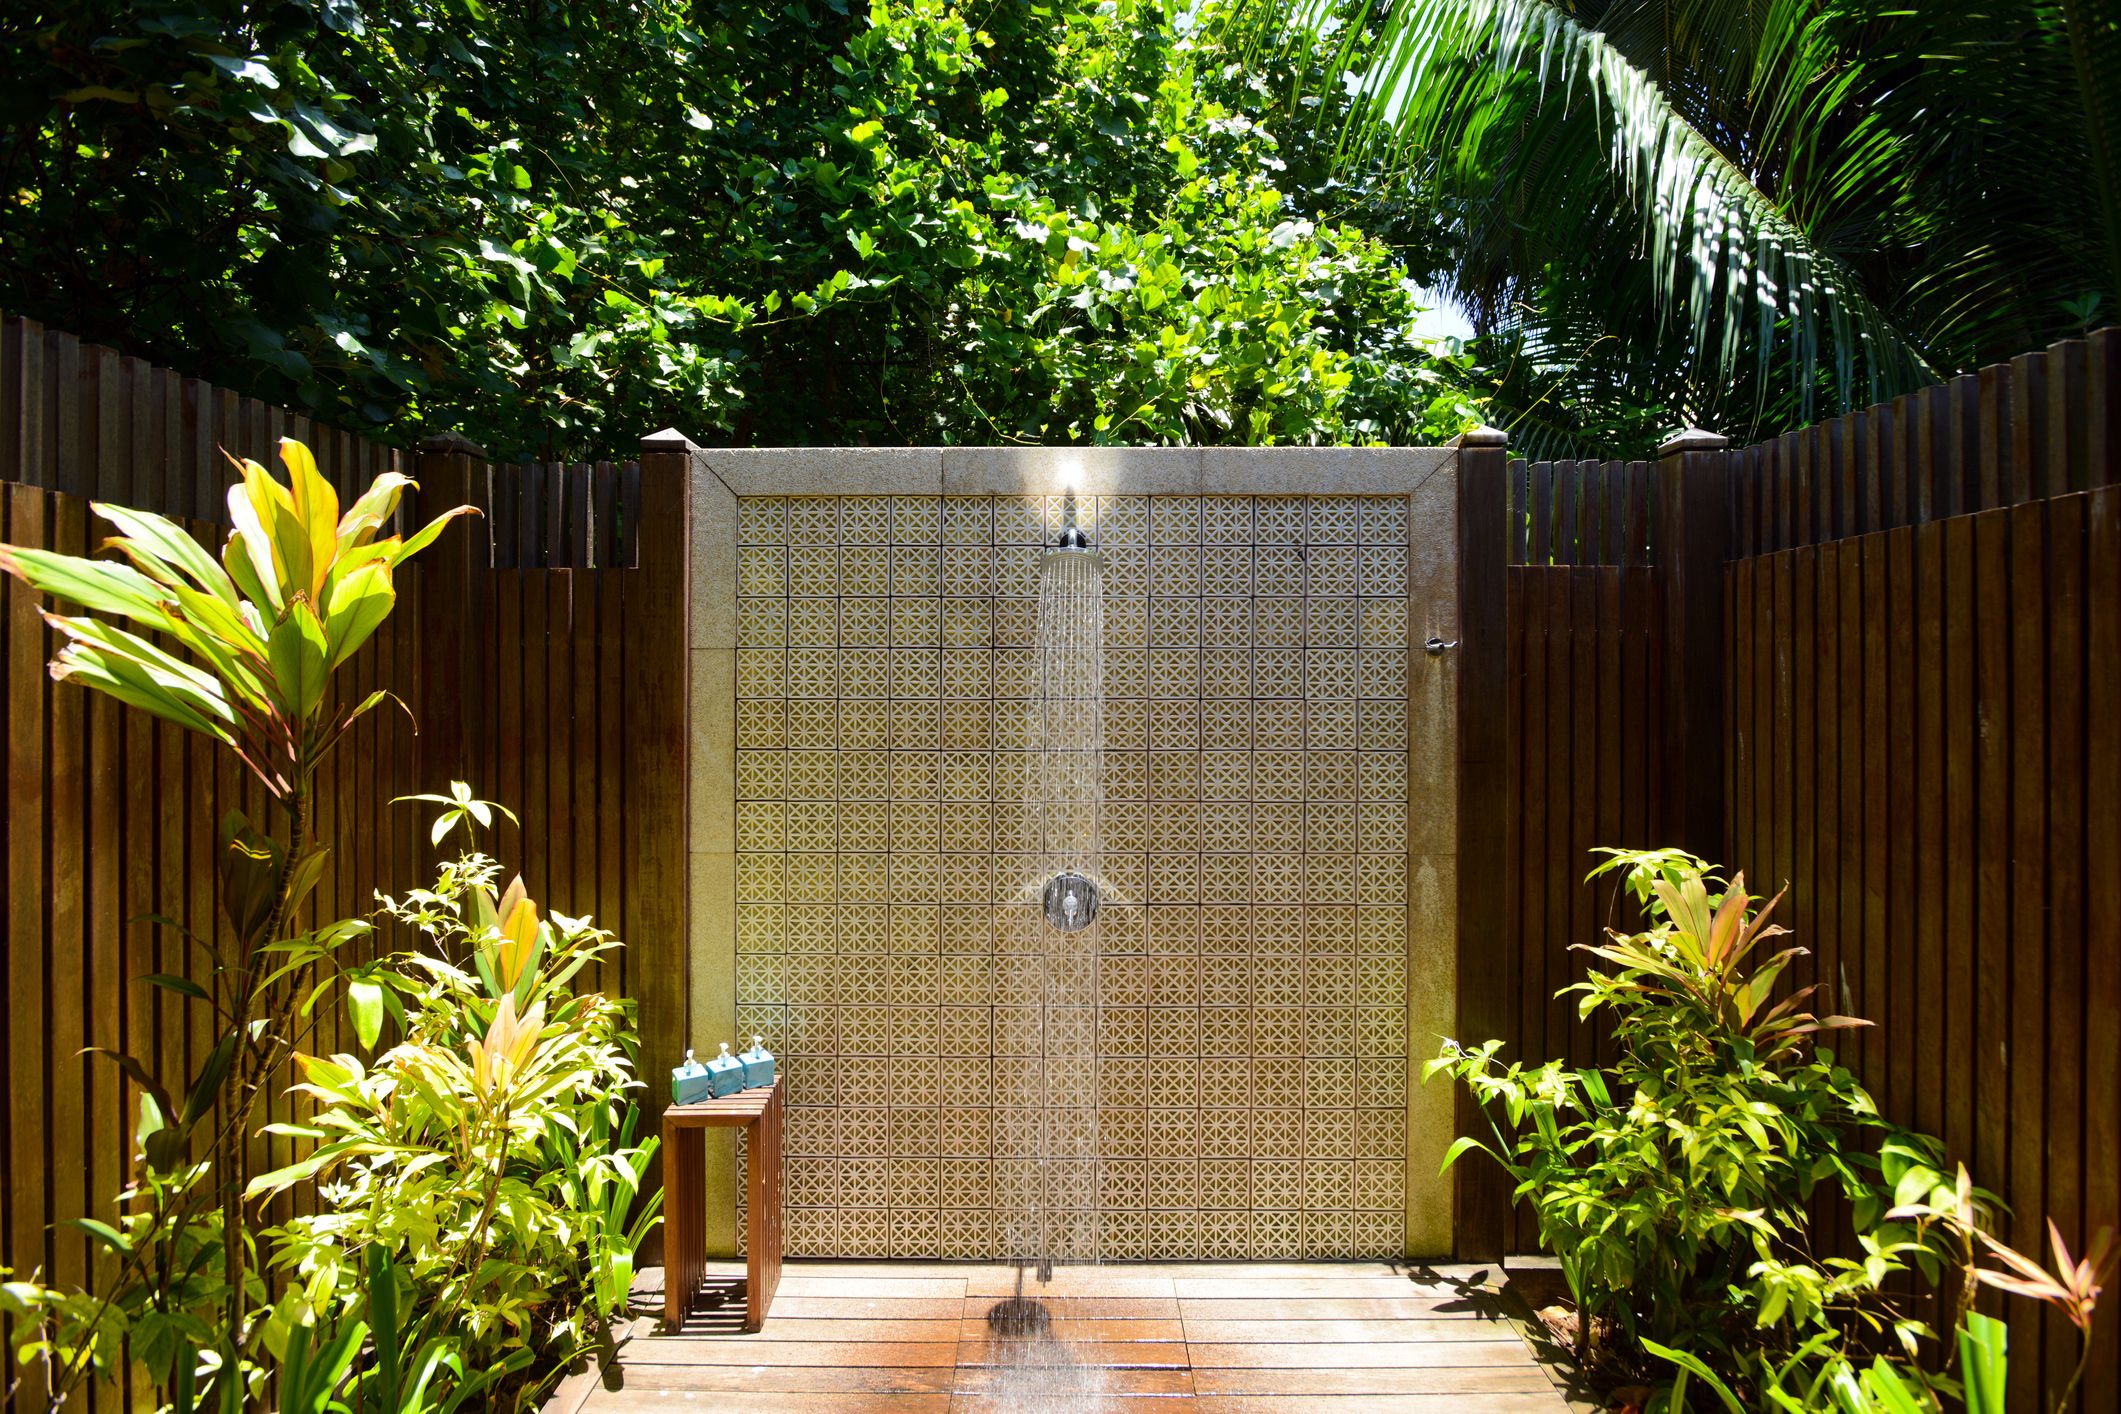 Tropical Outdoor Shower Designs - Cool Outdoor Shower Ideas For The Hot S.....